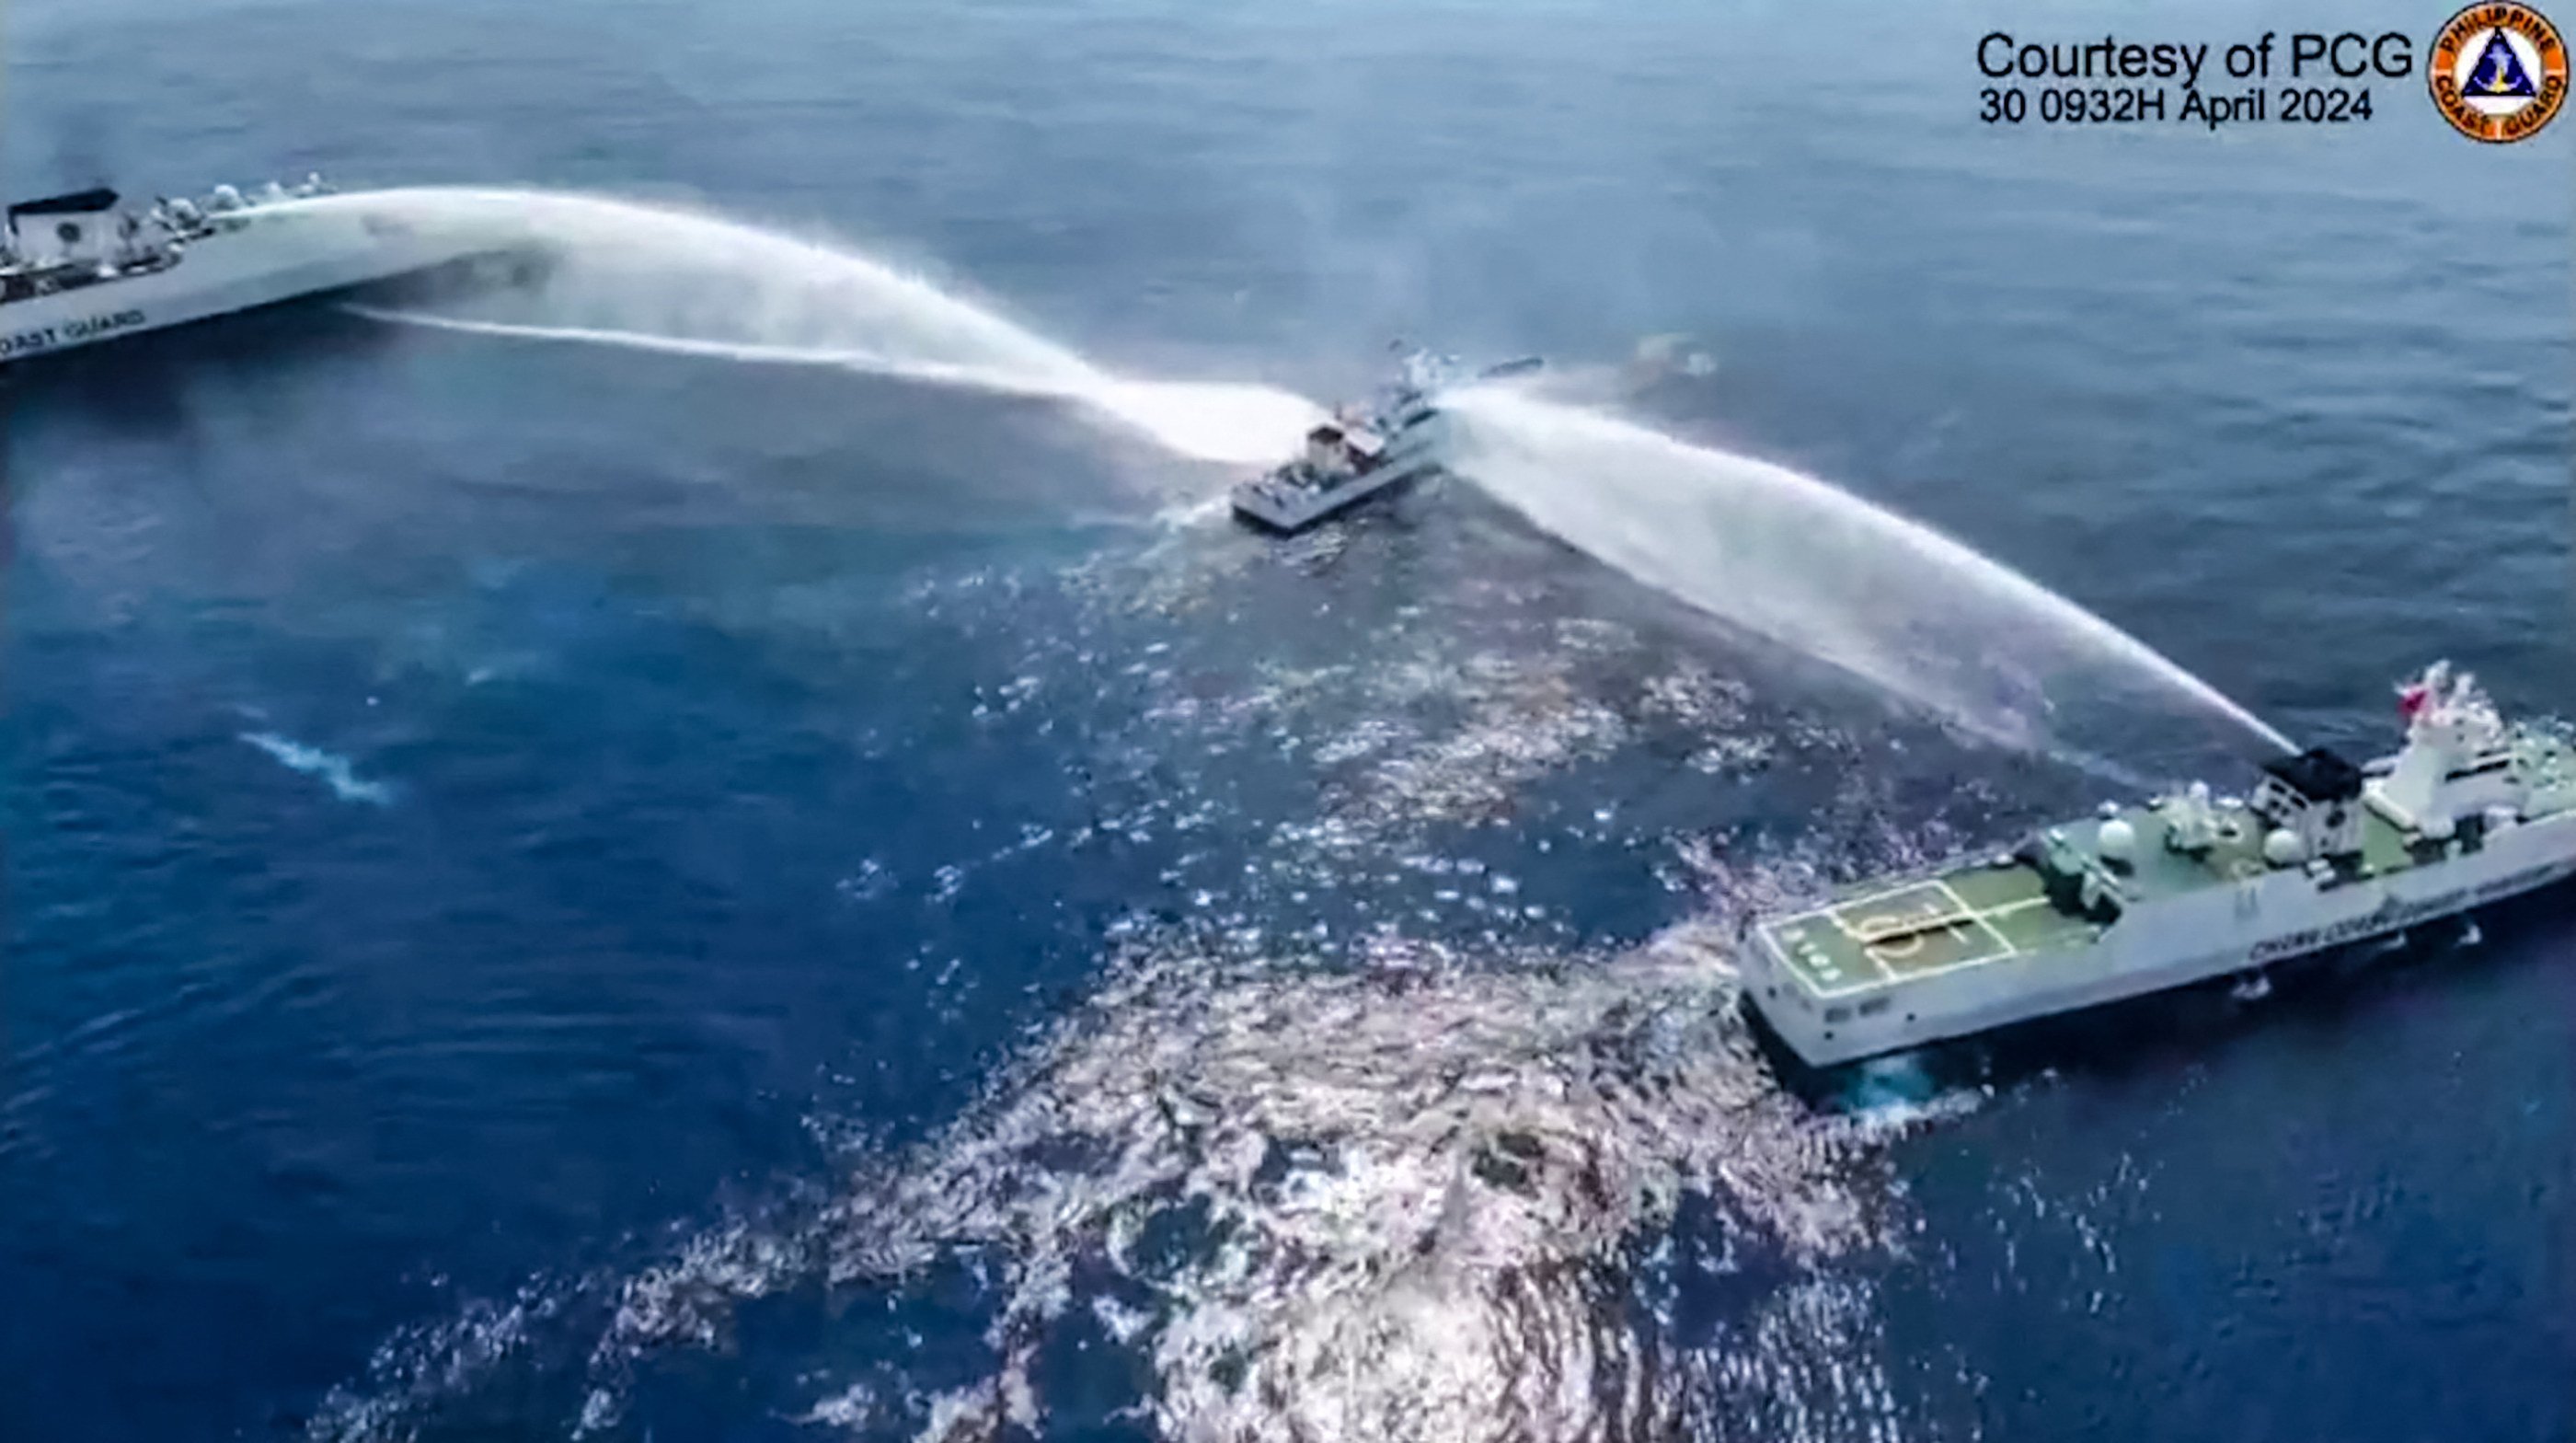 The Philippines said the China Coast Guard fired water cannon on April 30 at two of its vessels, causing damage to one of them, during a patrol near a reef off the Southeast Asian country. Photo: Handout